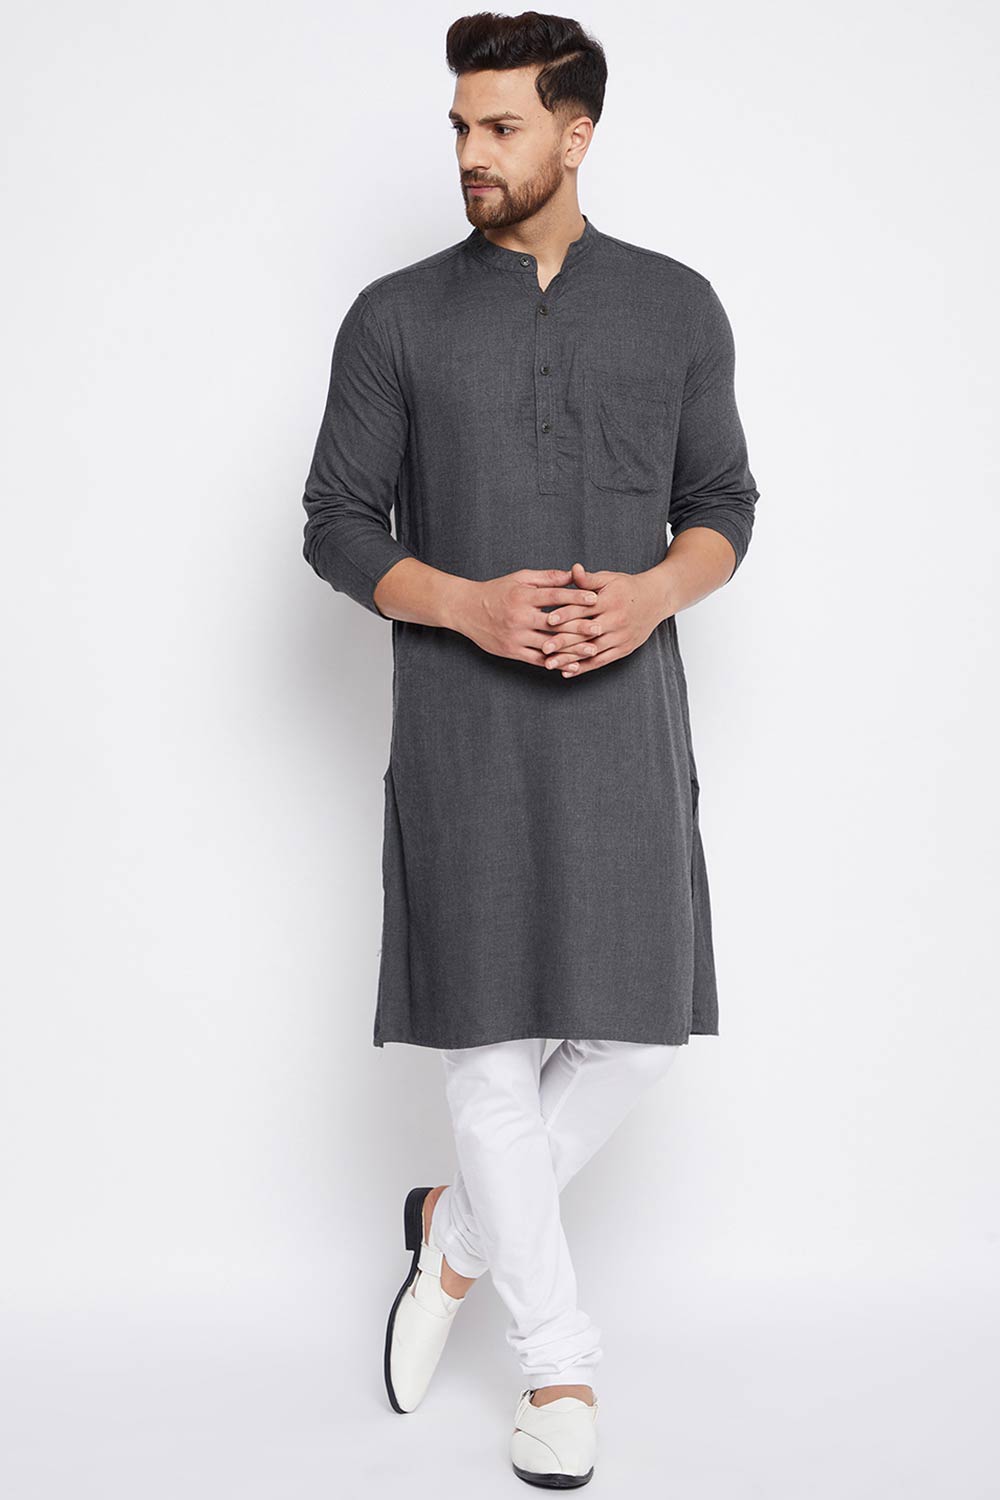 Gray Cotton Kurta Indian Clothing in Denver, CO, Aurora, CO, Boulder, CO, Fort Collins, CO, Colorado Springs, CO, Parker, CO, Highlands Ranch, CO, Cherry Creek, CO, Centennial, CO, and Longmont, CO. NATIONWIDE SHIPPING USA- India Fashion X